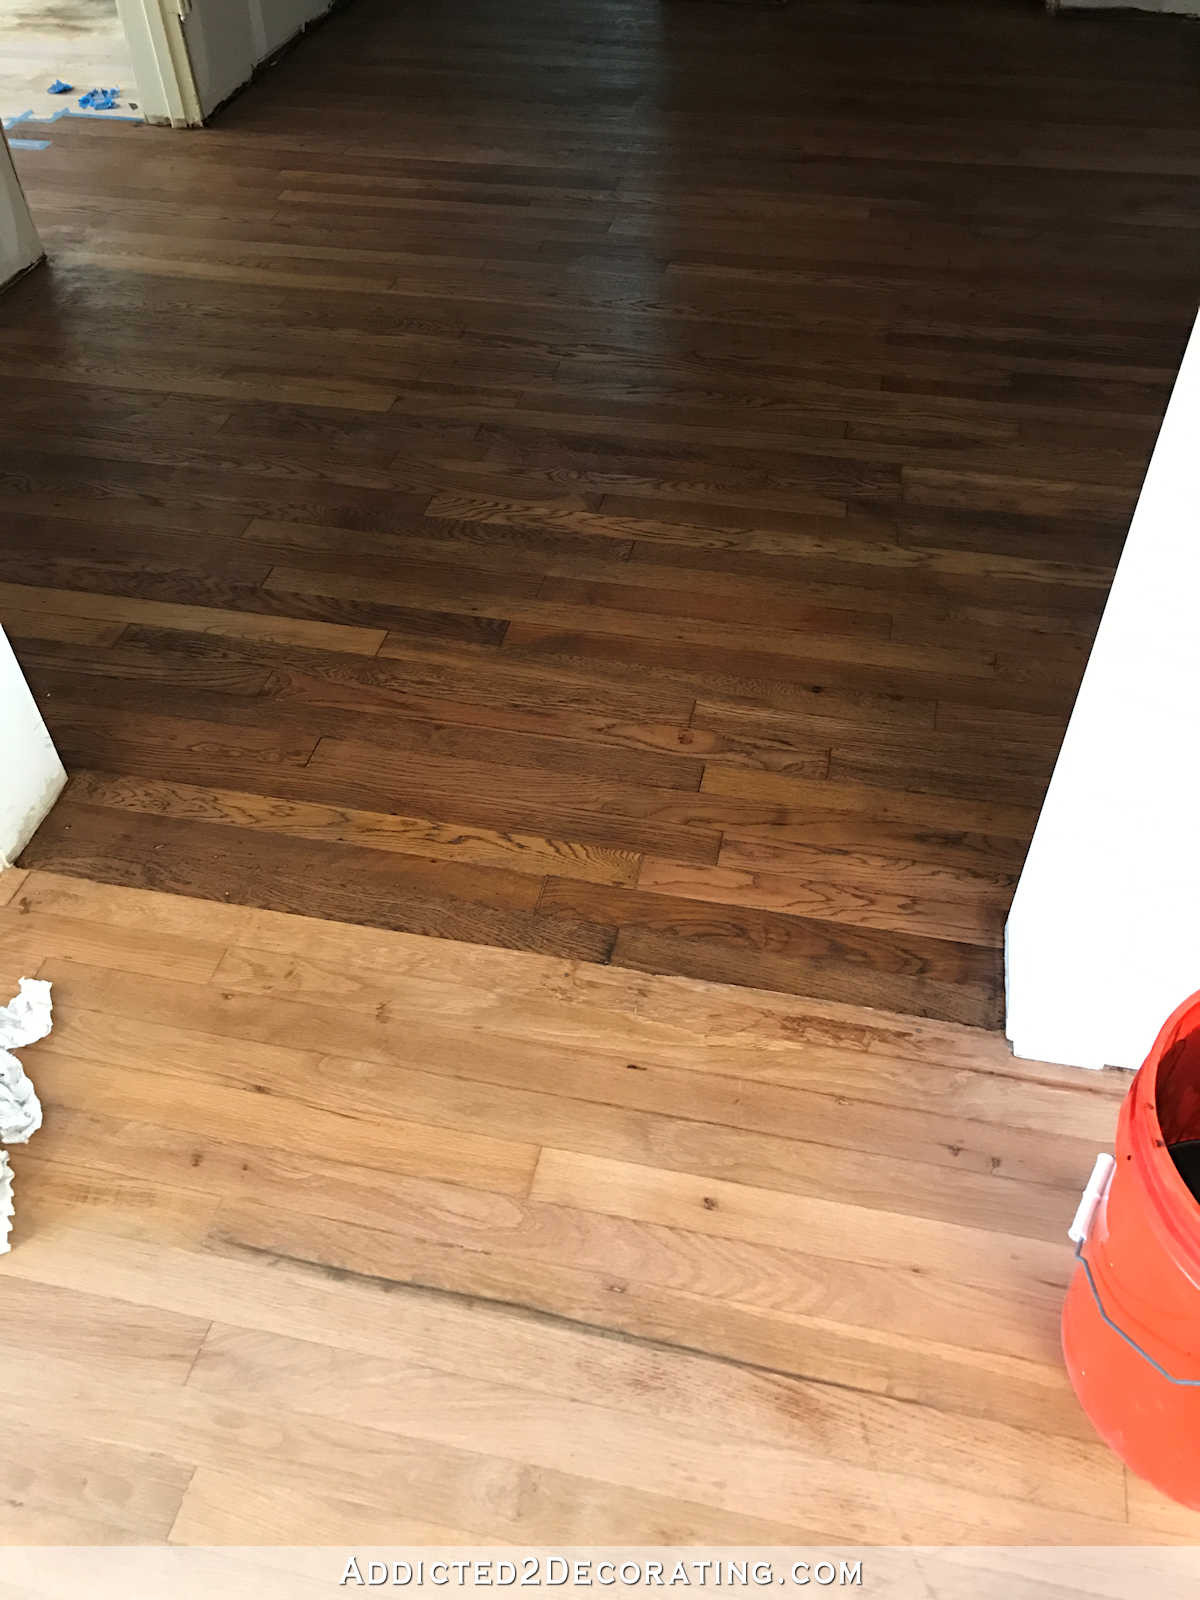 27 Perfect Refinishing Hardwood Floors One Room at A Time 2024 free download refinishing hardwood floors one room at a time of adventures in staining my red oak hardwood floors products process intended for staining red oak hardwood floors 2 tape off one section at a